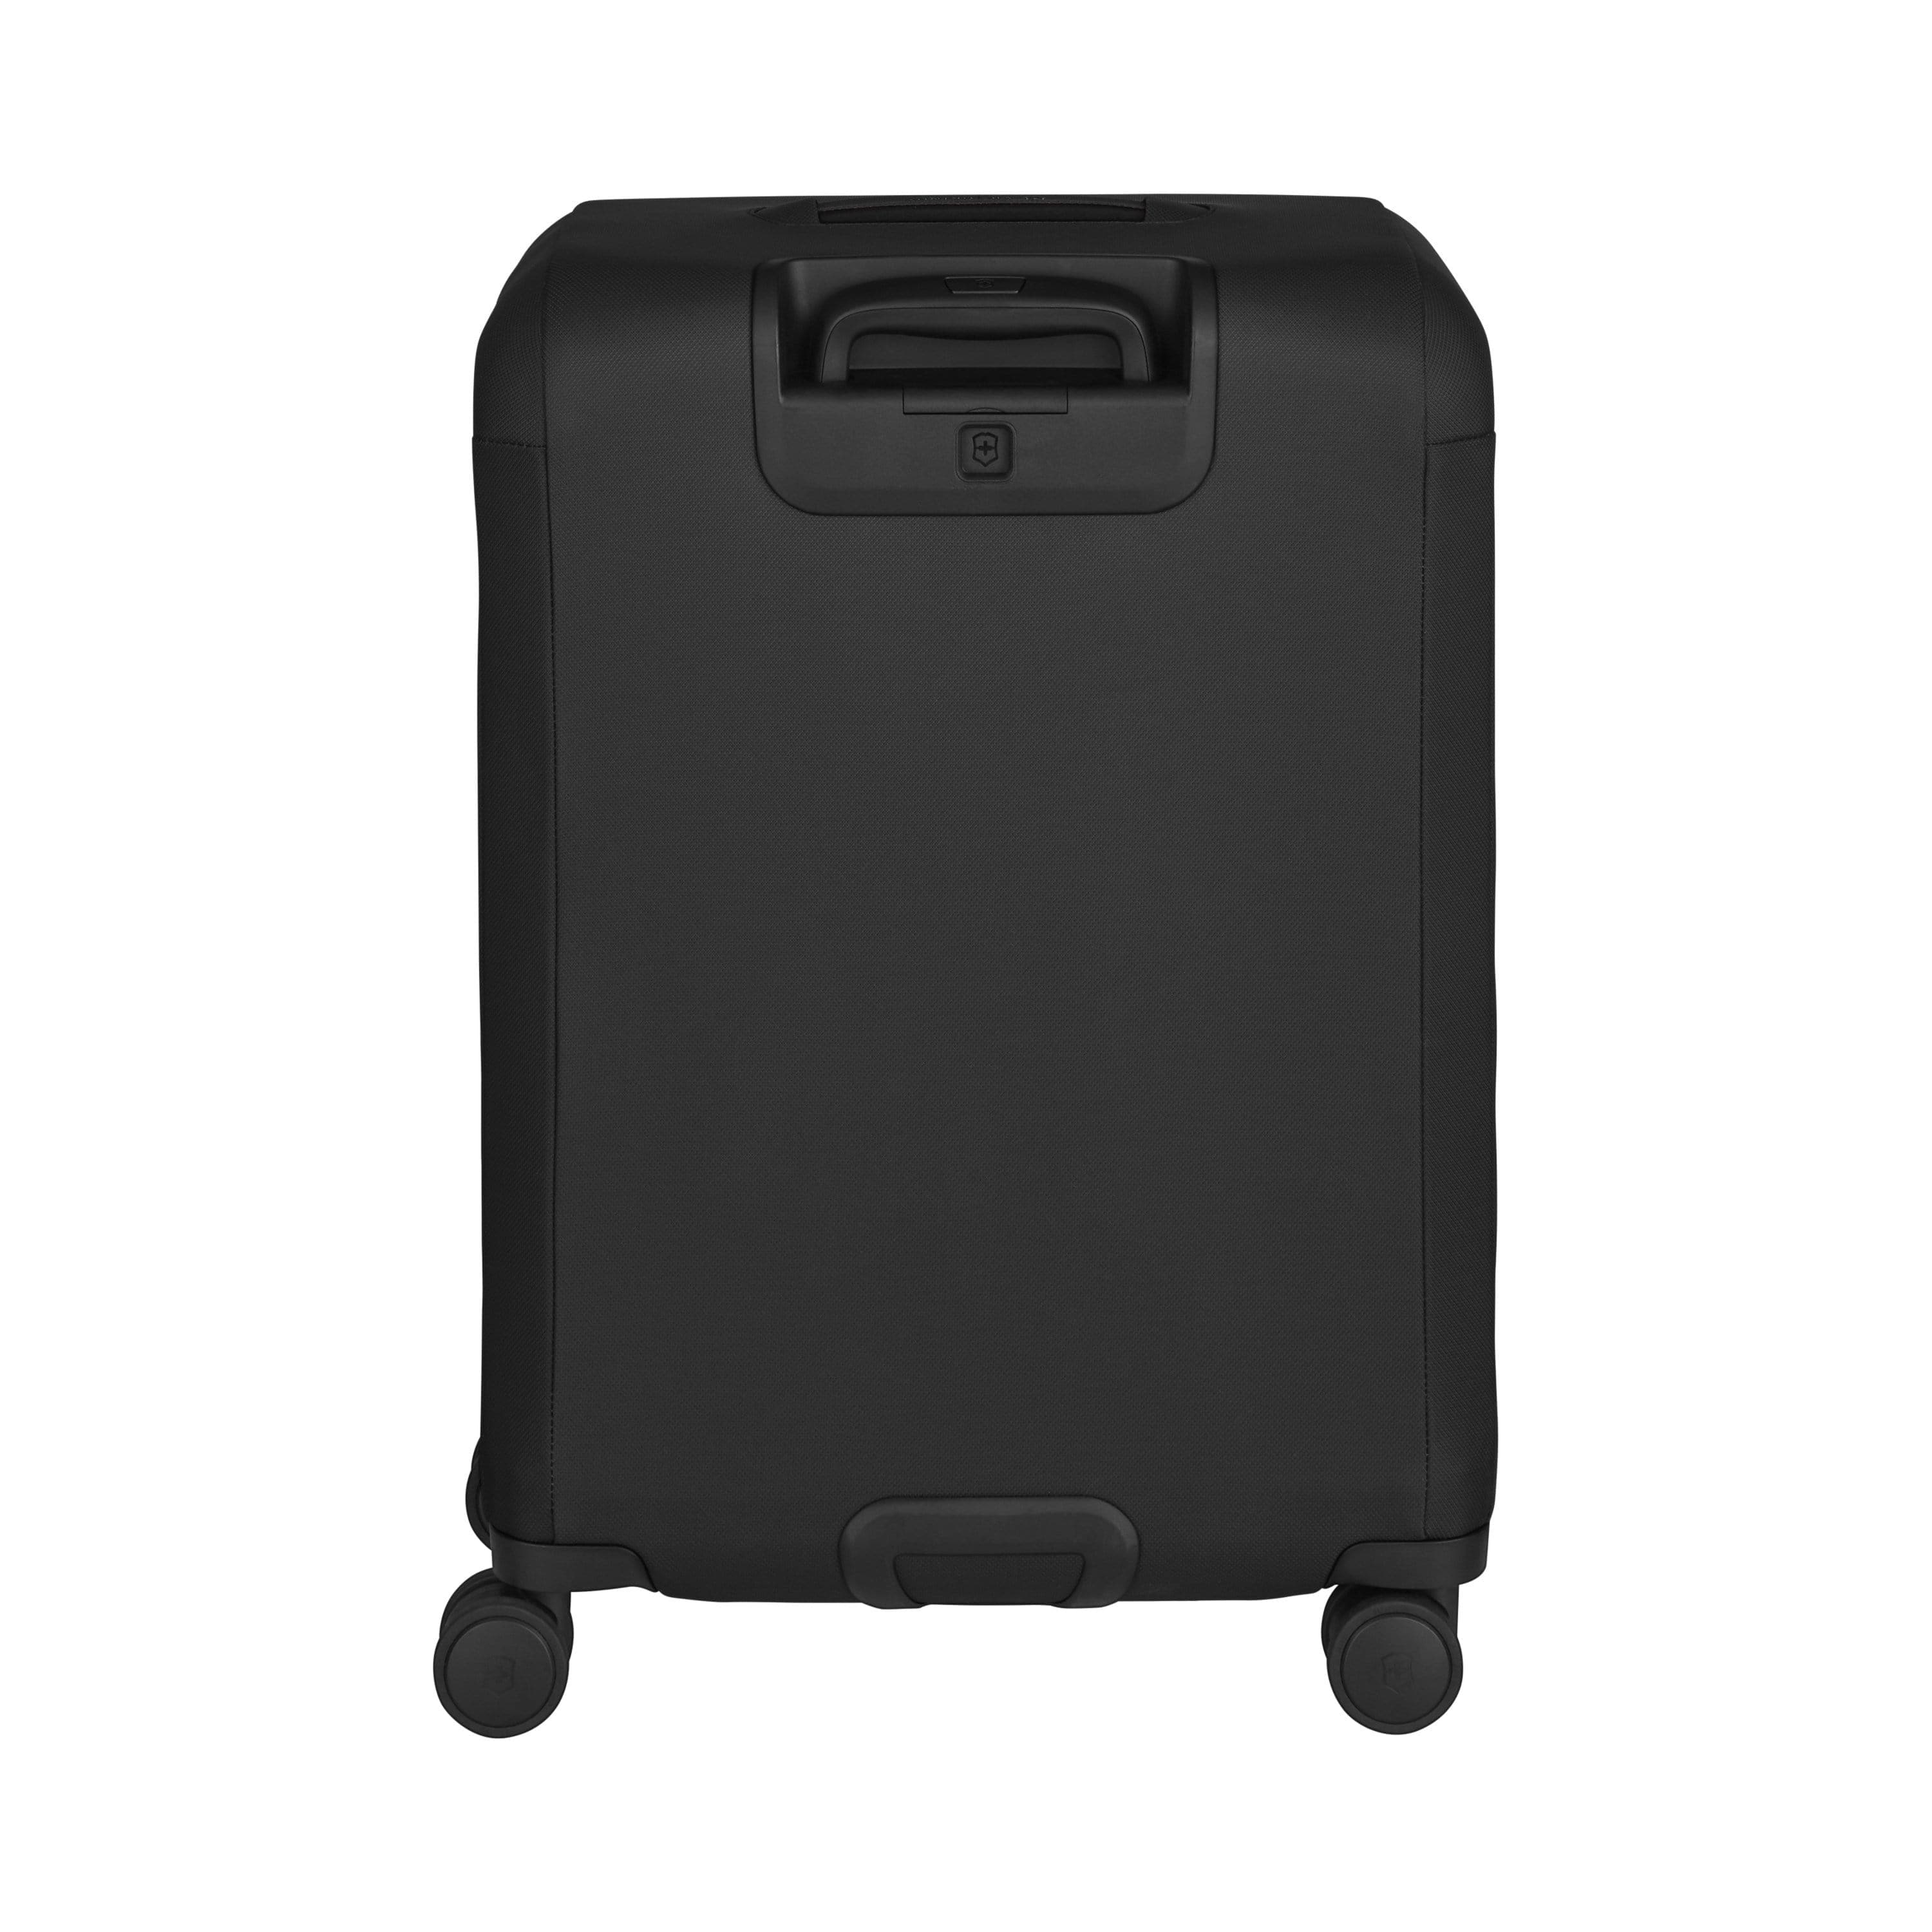 Victorinox Connex 69cm Medium Softcase Expandable Check-In Luggage Trolley Black - 610966